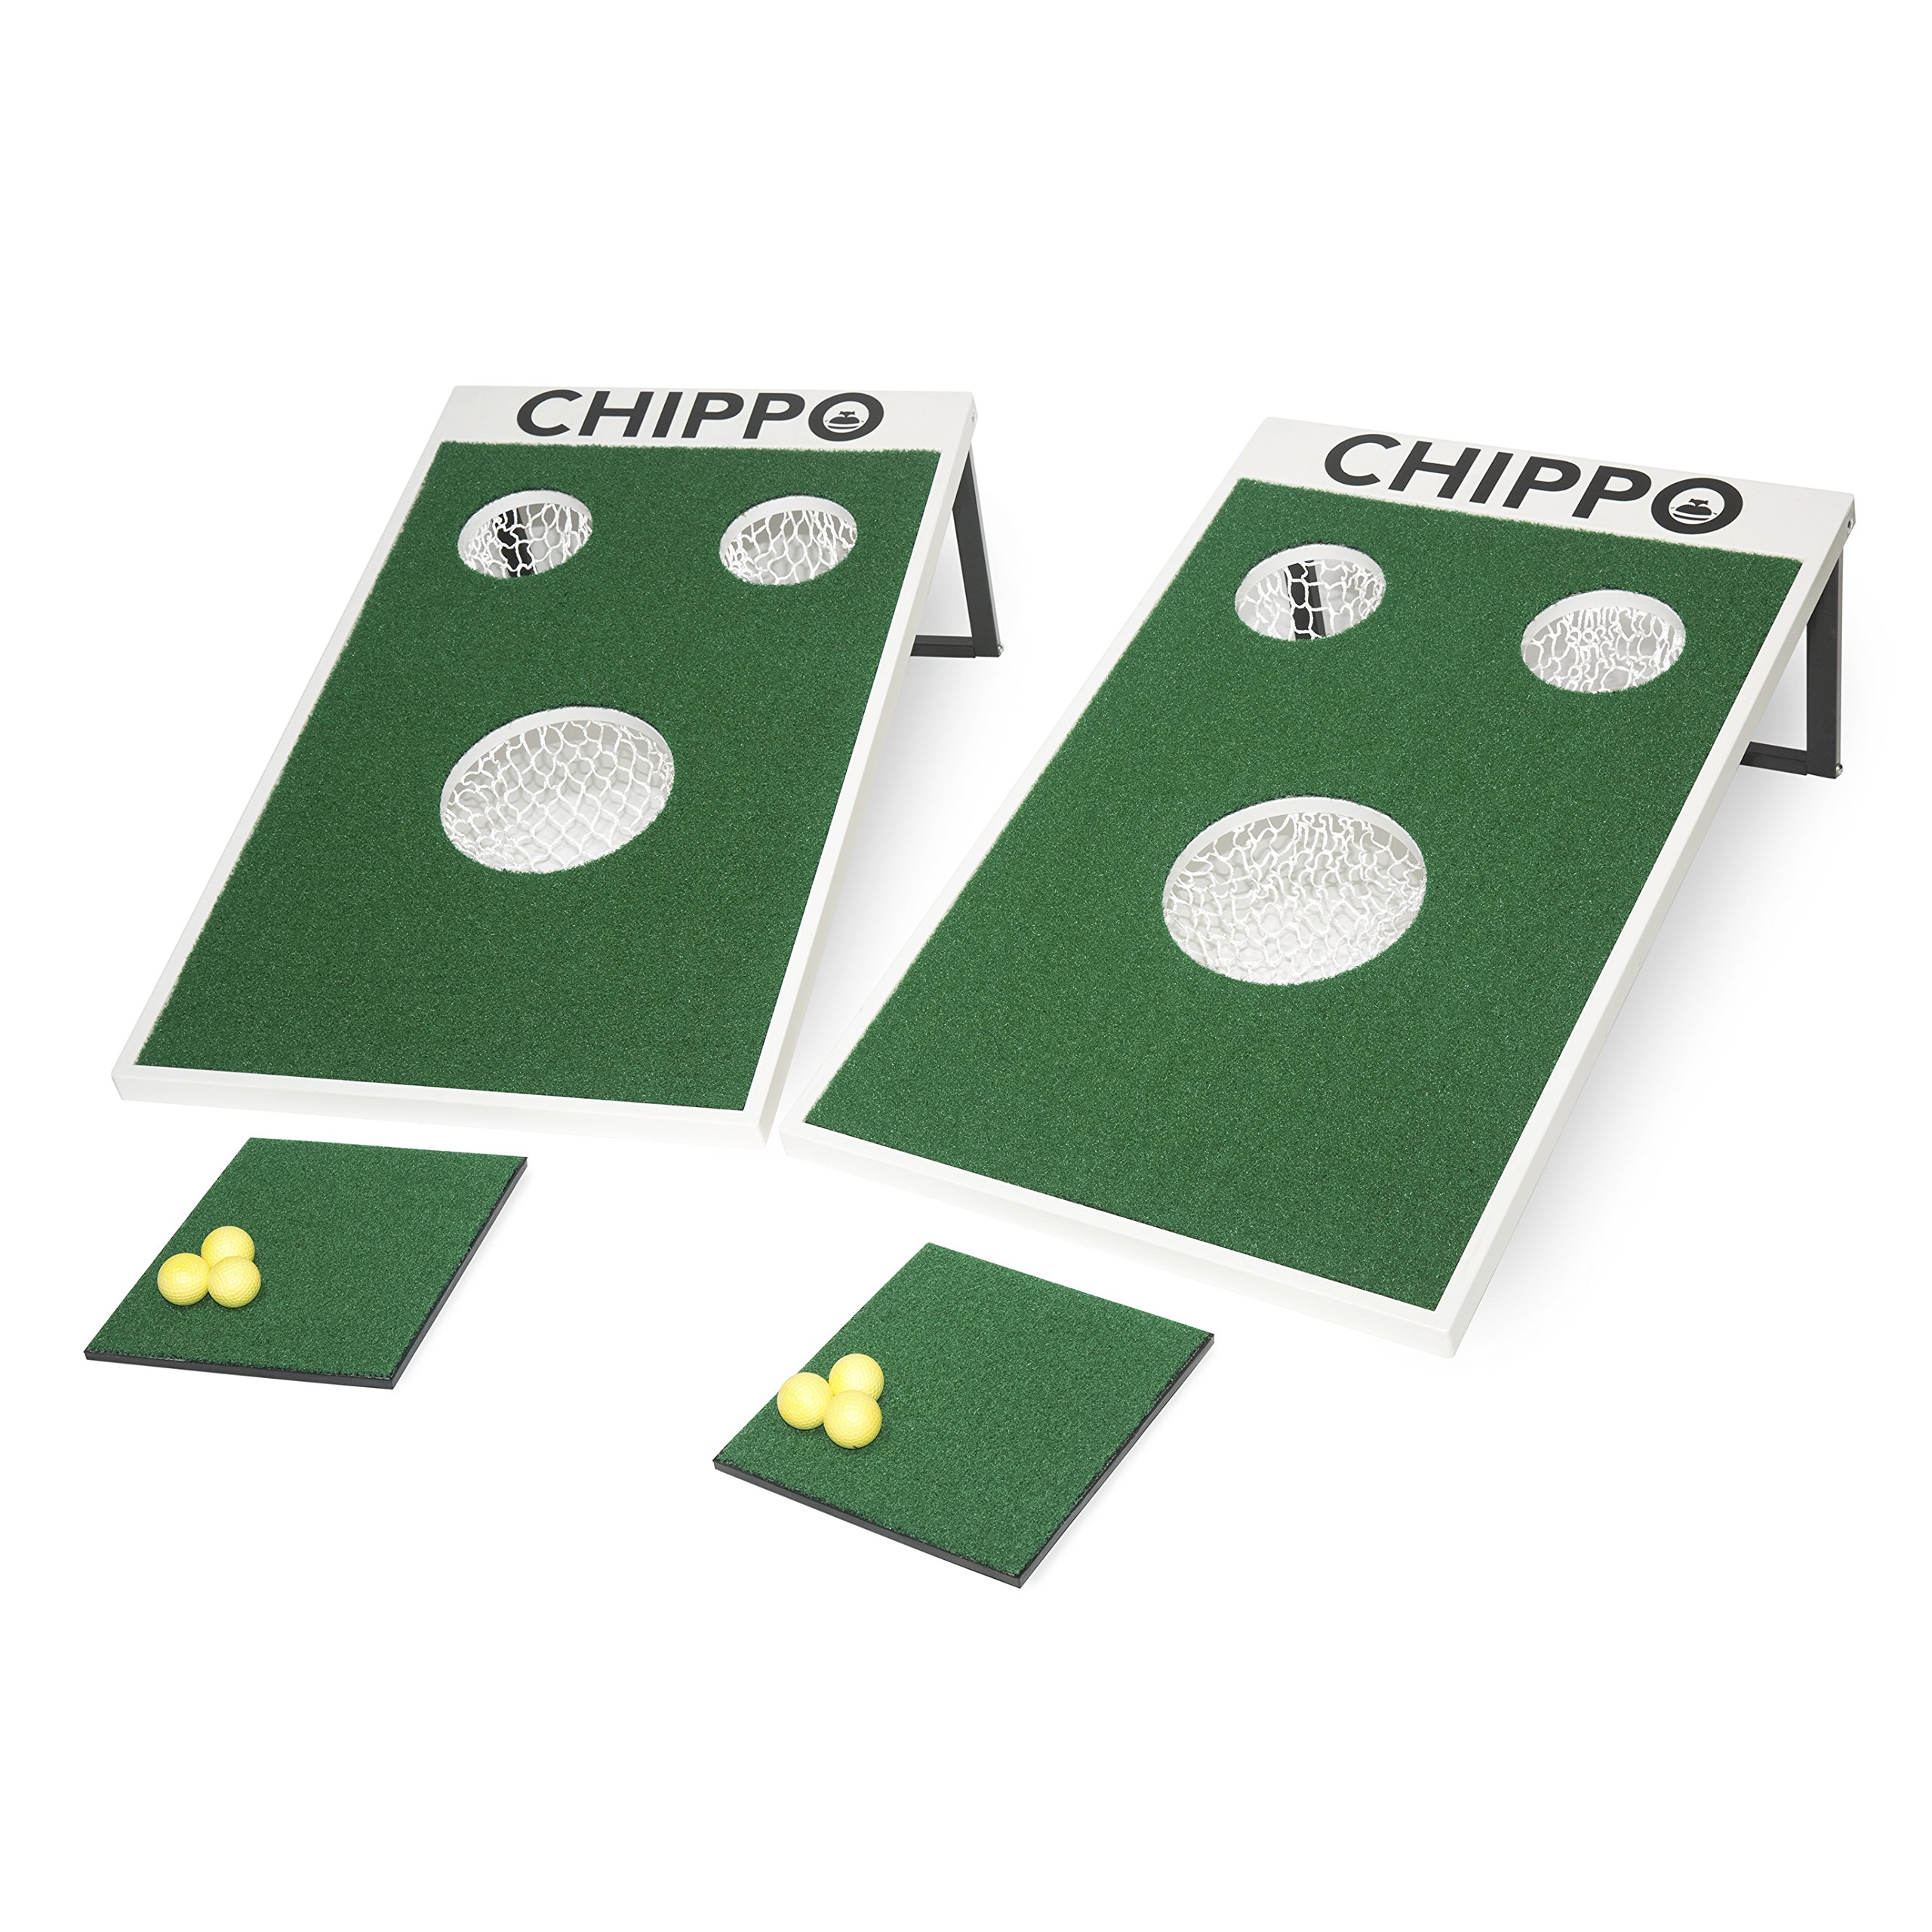 Chippo Golf Indoor/Outdoor Game Set w/ 2 Target Boards, 2 Chipping Mats & 6 Foam Practice Balls $95 + Free Shipping